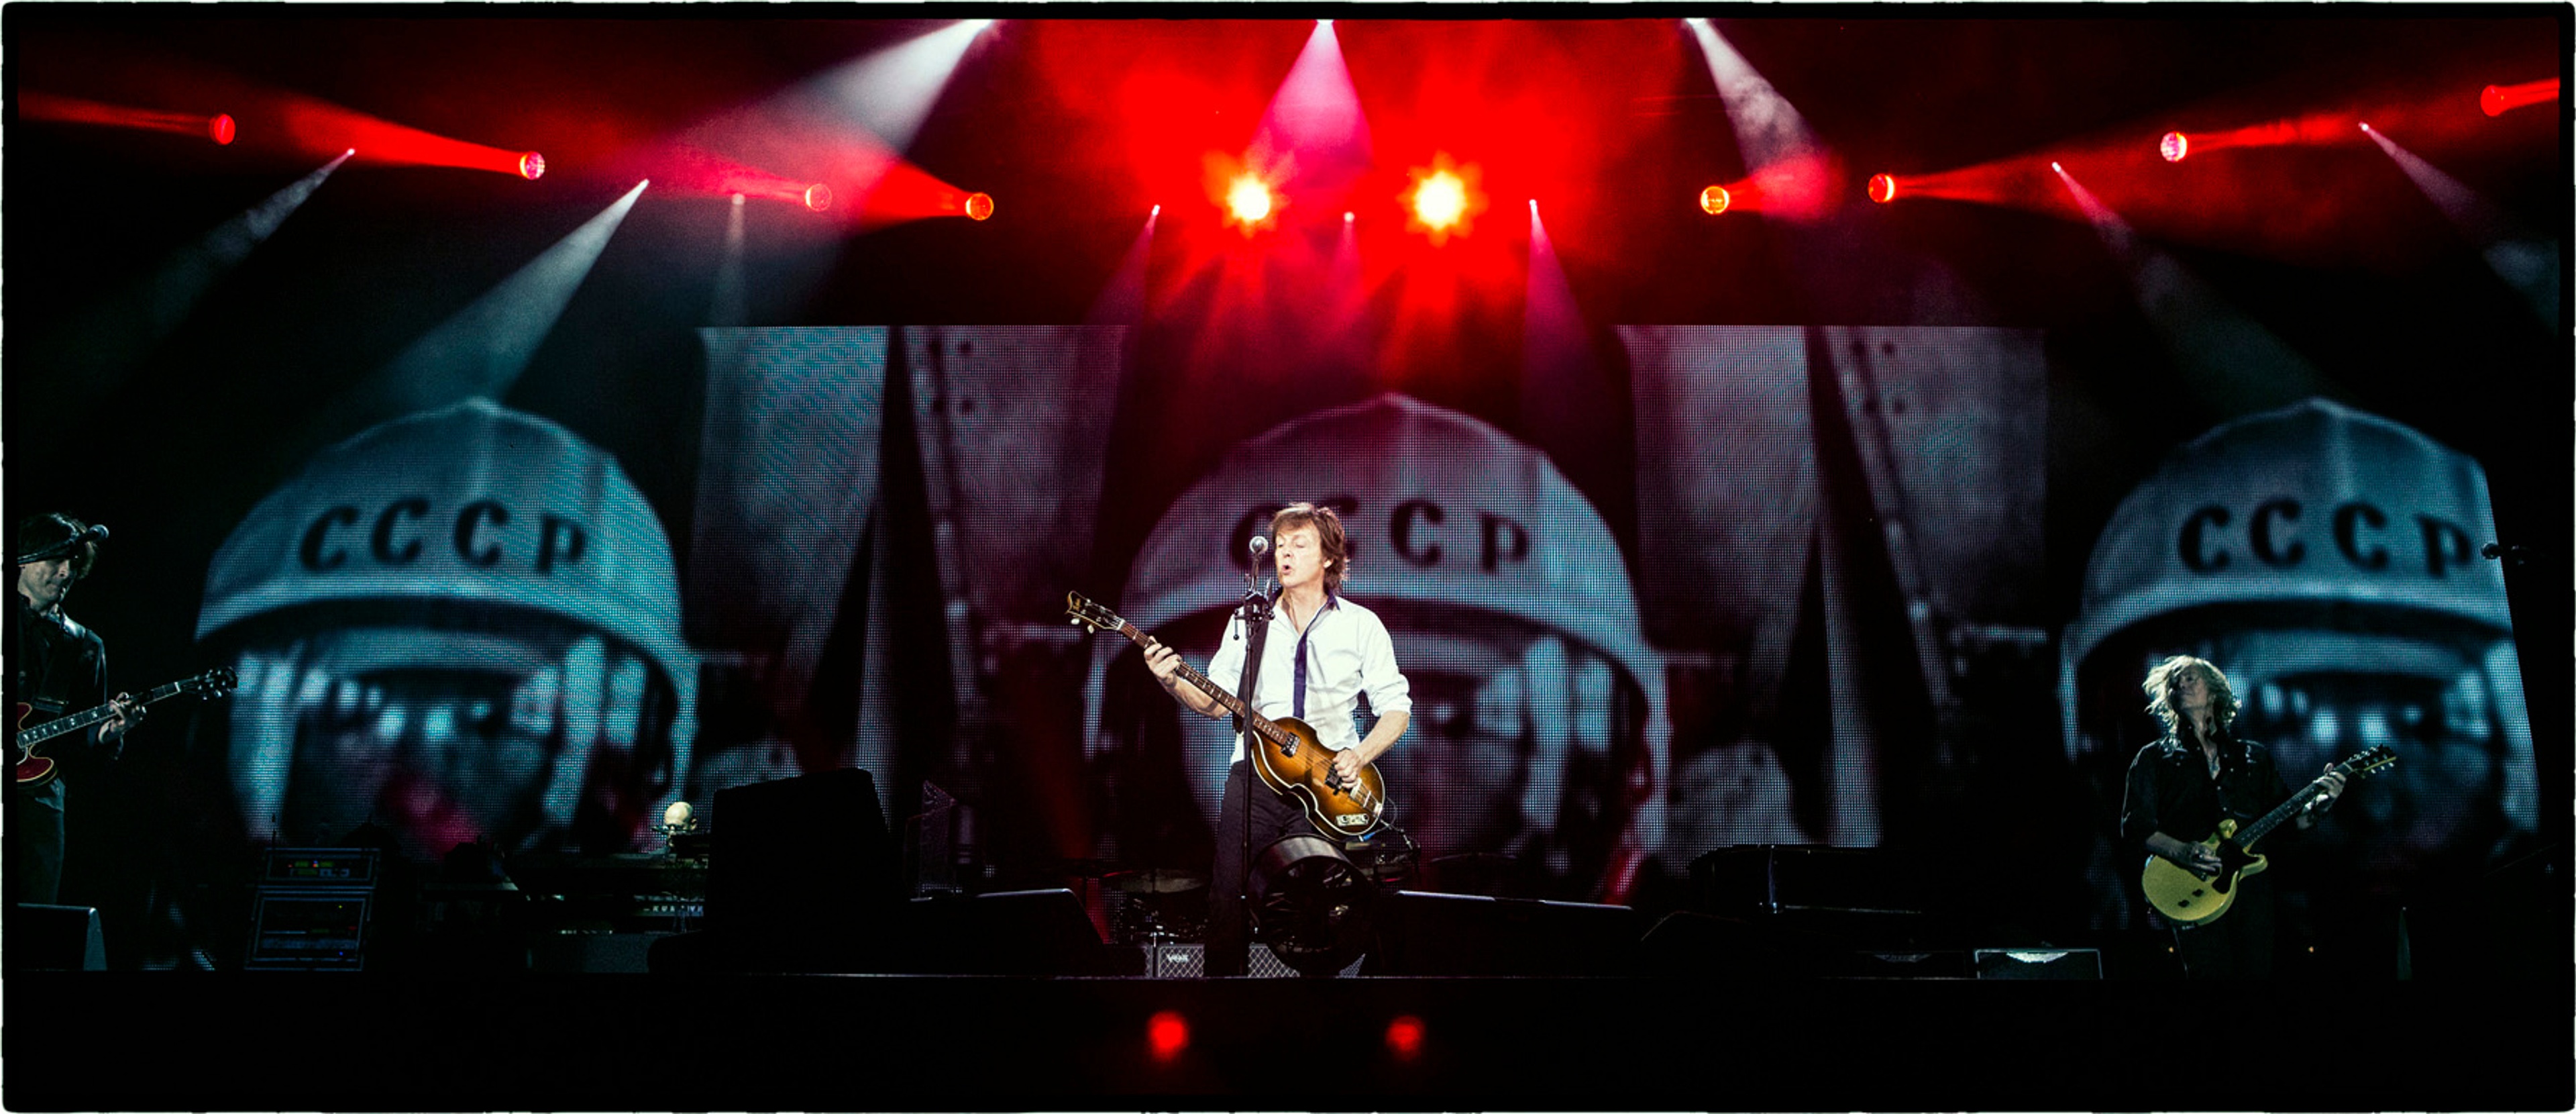 Rusty, Wix, Paul and Brian performing 'Back in the U.S.S.R.', National Stadium, Warsaw, 22nd June 2013